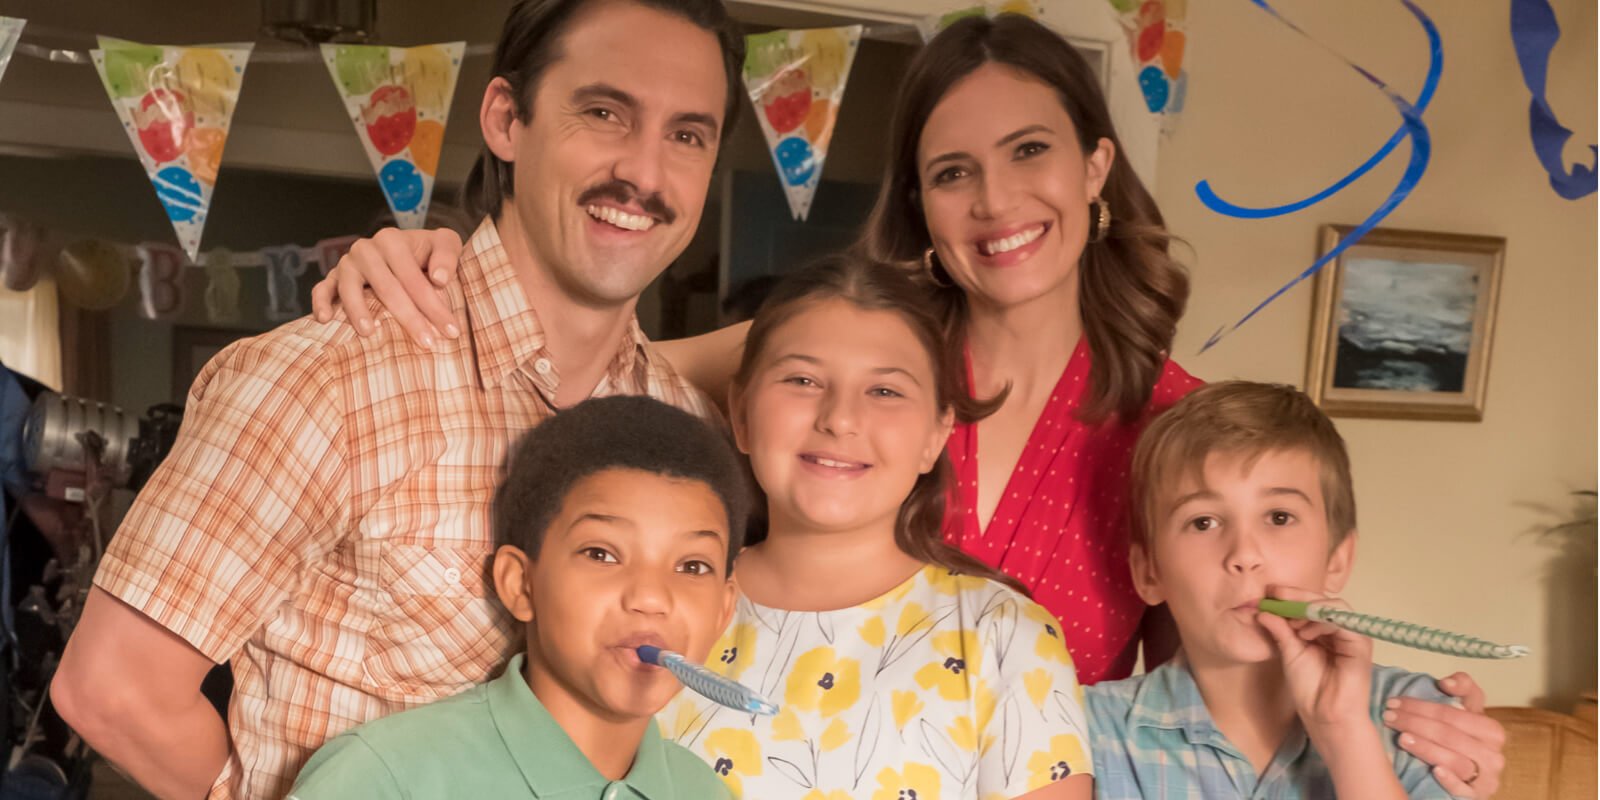 Mandy Moore and Milo Ventimiglia pose on the This Is Us set alongside Lonnie Chavis as Randall, Mackenzie Hancsicsak as Kate, and Parker Bates as Kevin.